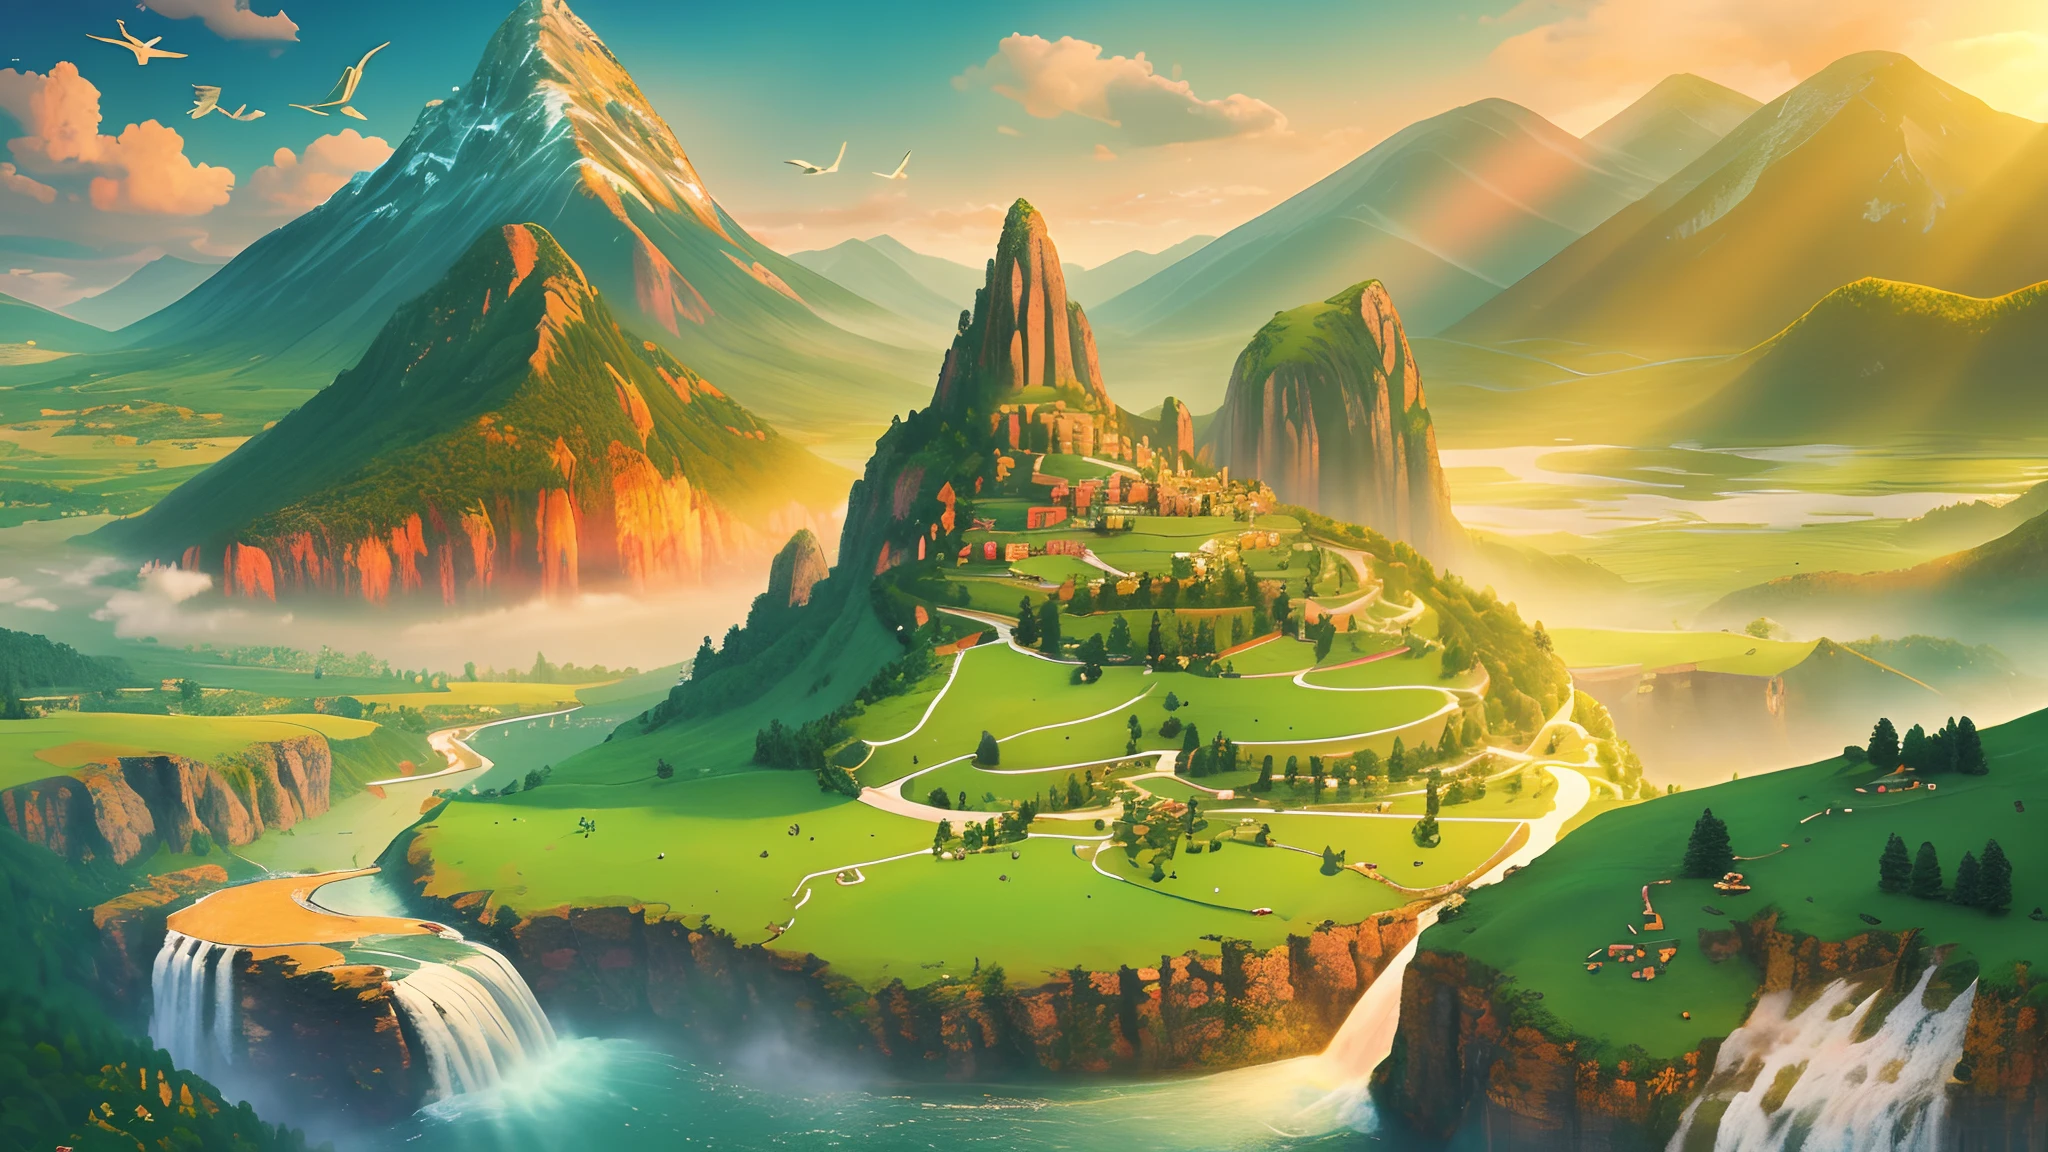 Masterpiece, best quality, very detailed landscape with direct sun rays going down the earth, water flowing, green grass, very beautiful and colorful mountain city in the middle, birds are flying around it